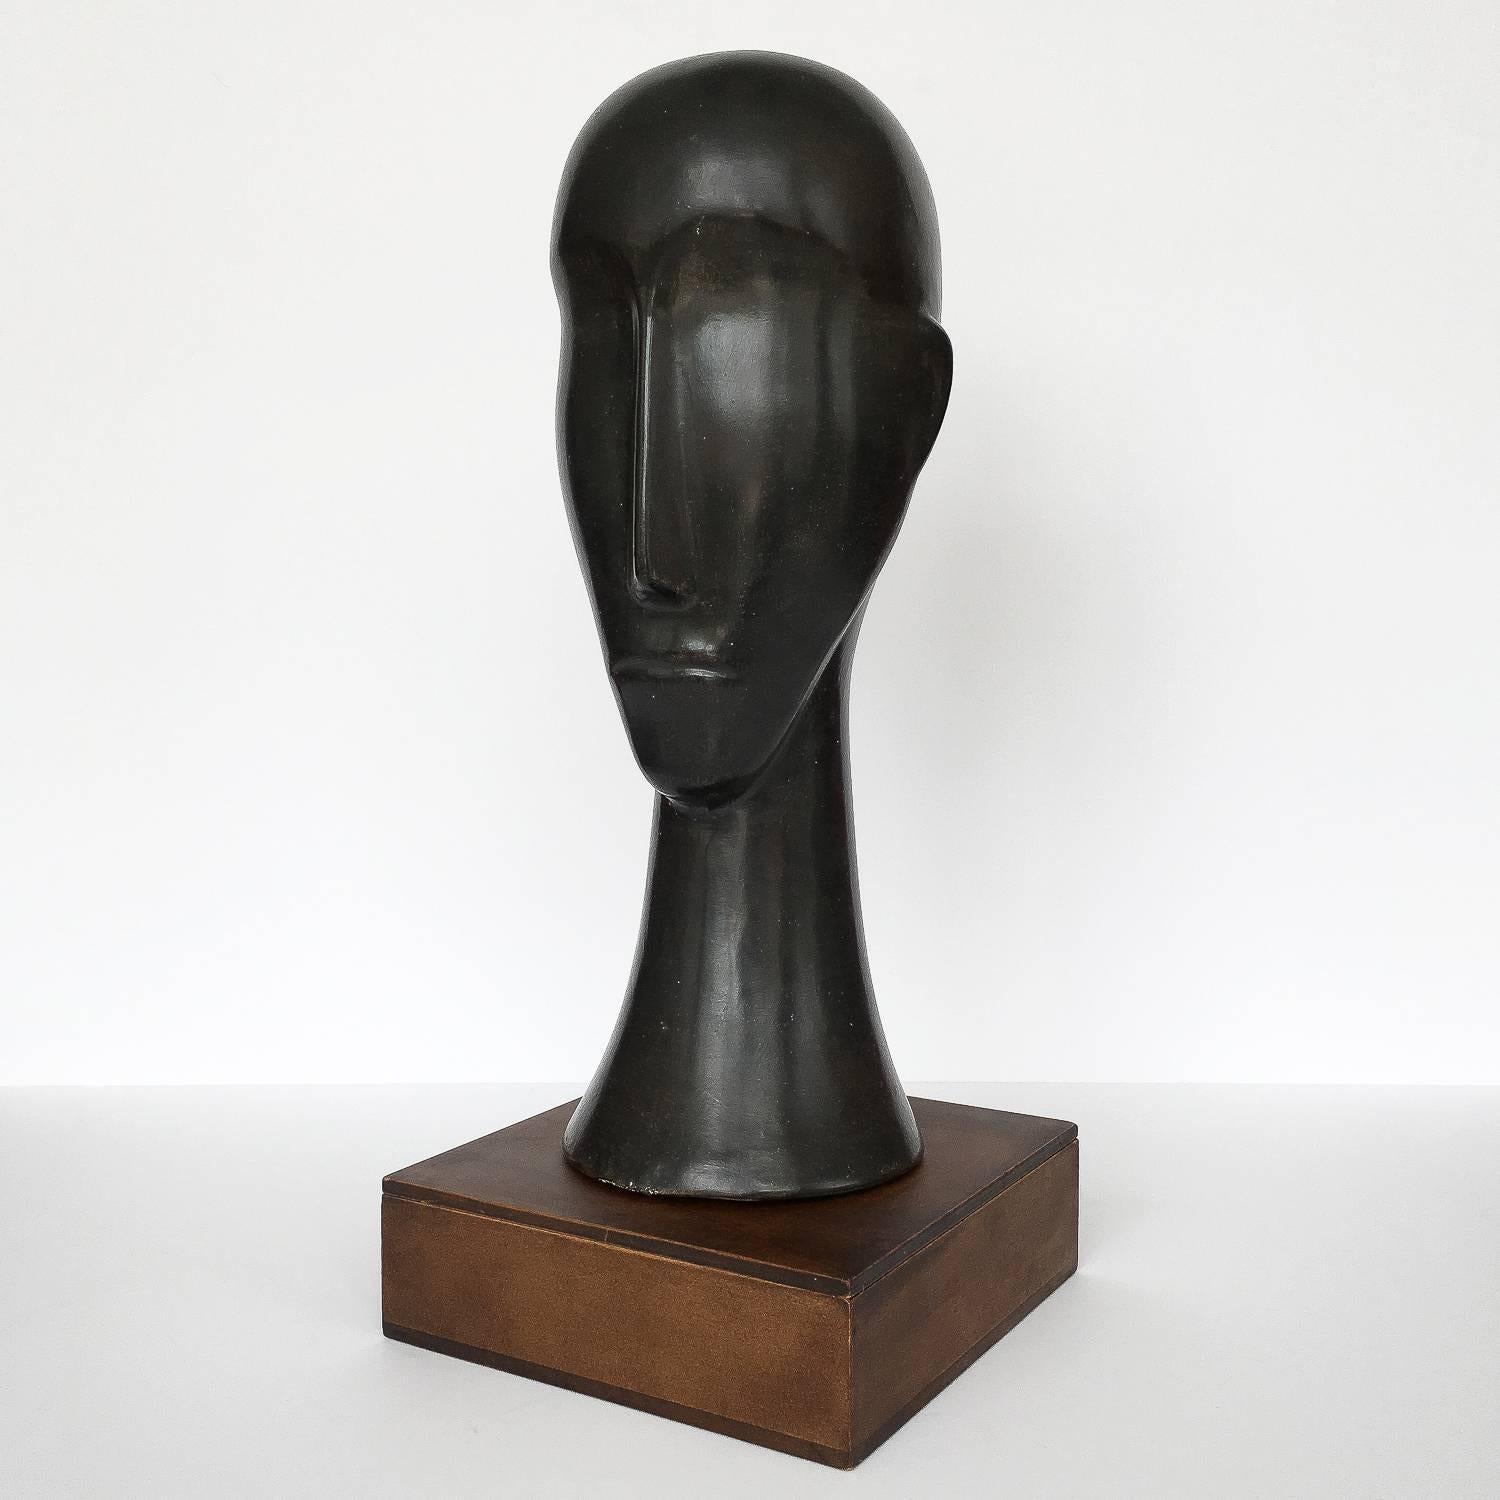 A Modernist Amedeo Modigliani style ceramic sculpture of an elongated male head / bust, circa 1960s. Monolithic in form the ceramic head is glazed in black and is atop a masonite box platform. The sculpture is not affixed to the base. Base measures